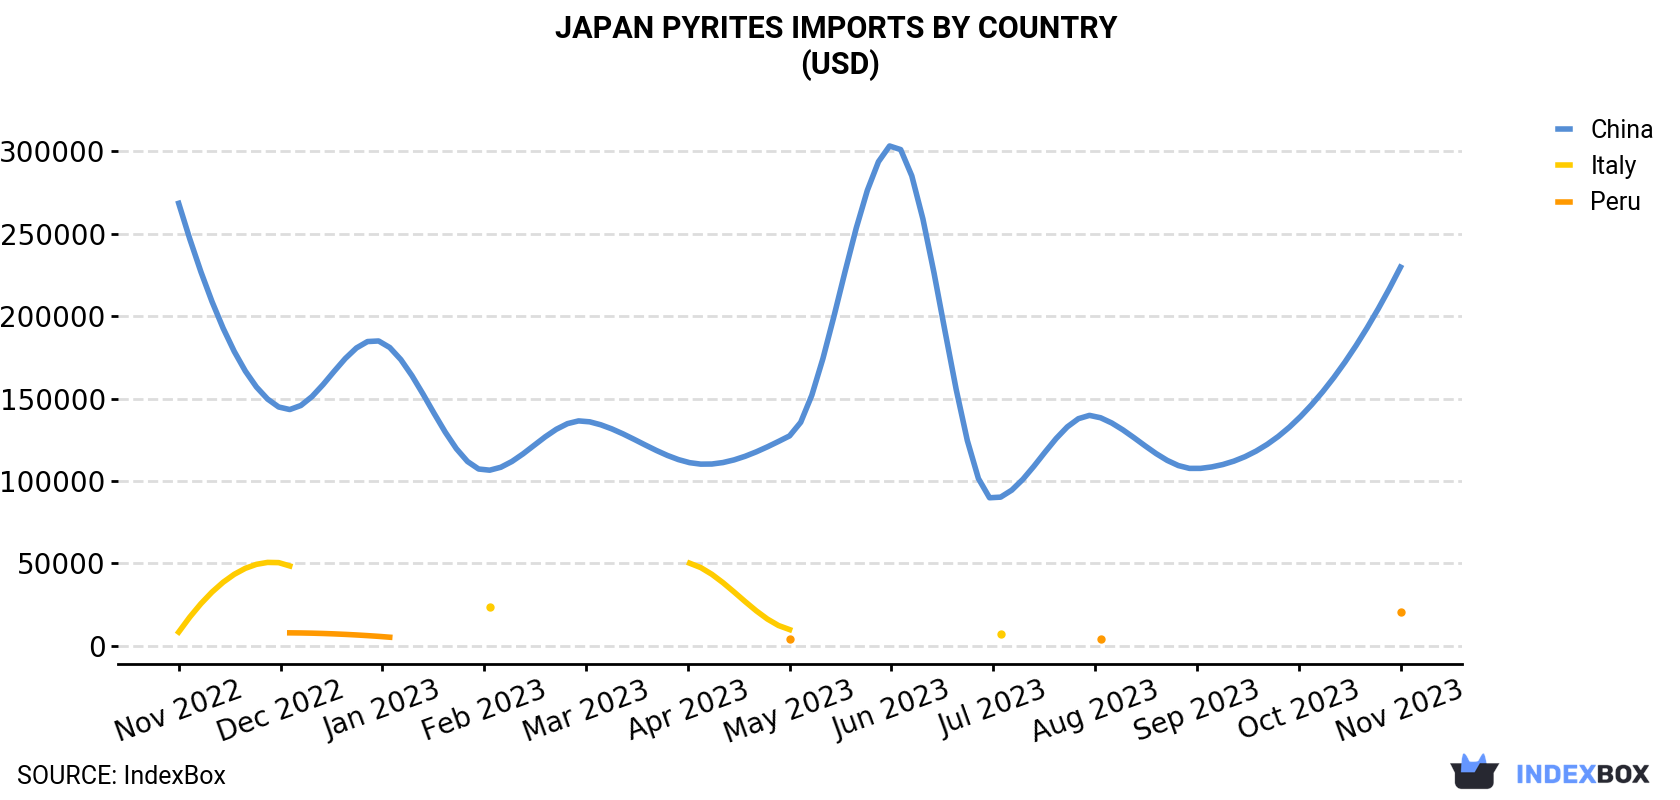 Japan Pyrites Imports By Country (USD)